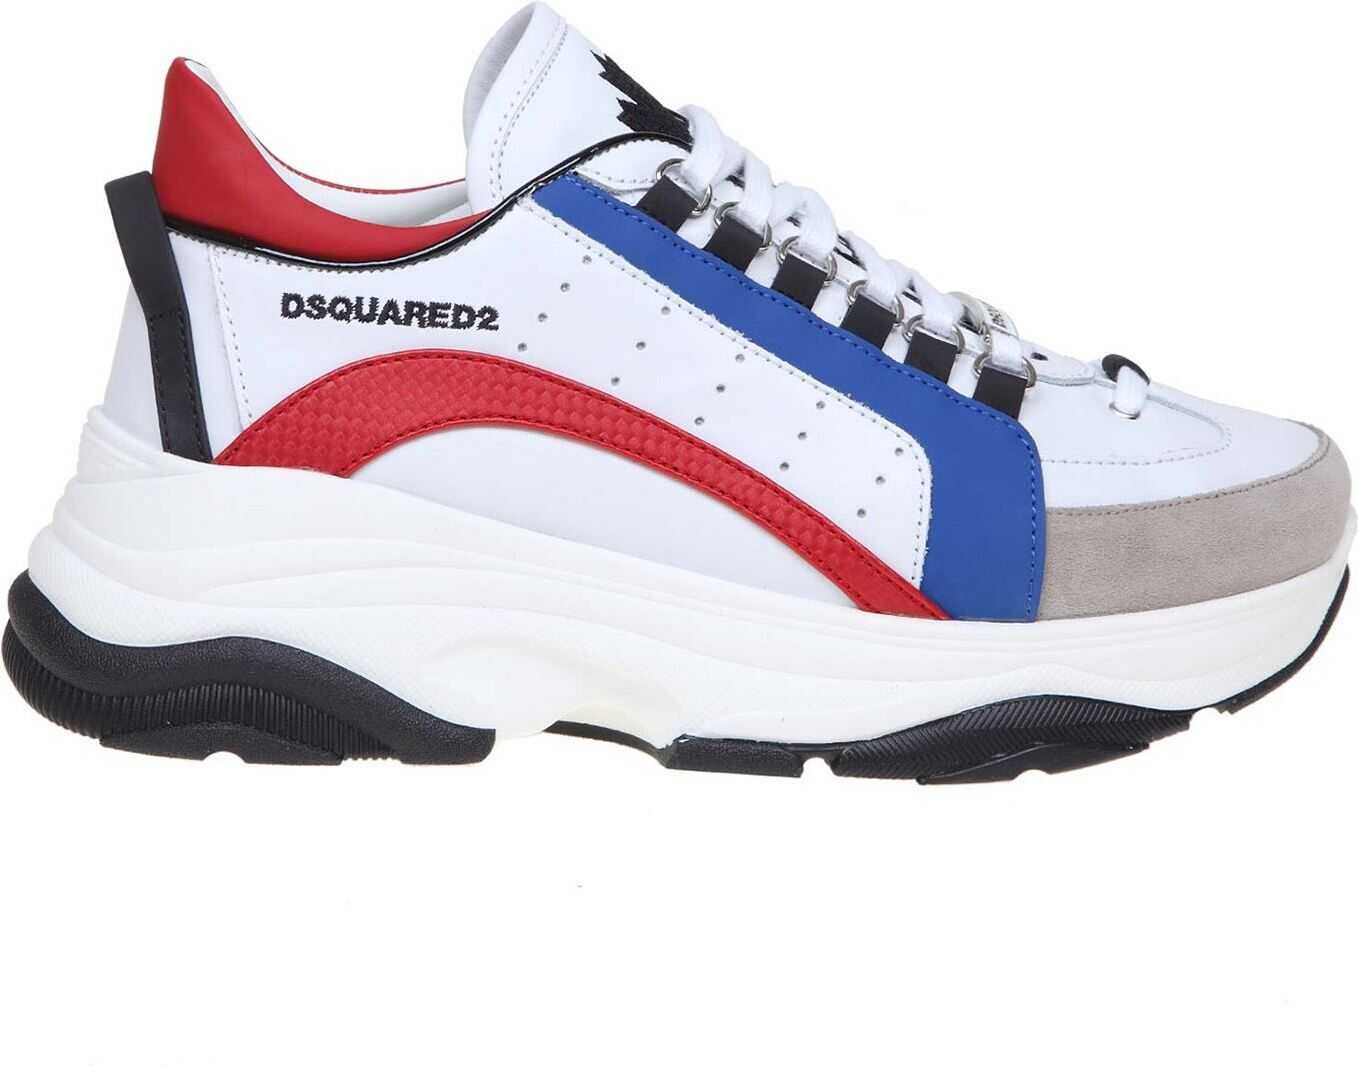 DSQUARED2 Bumpy 551 Leather Sneakers In White White